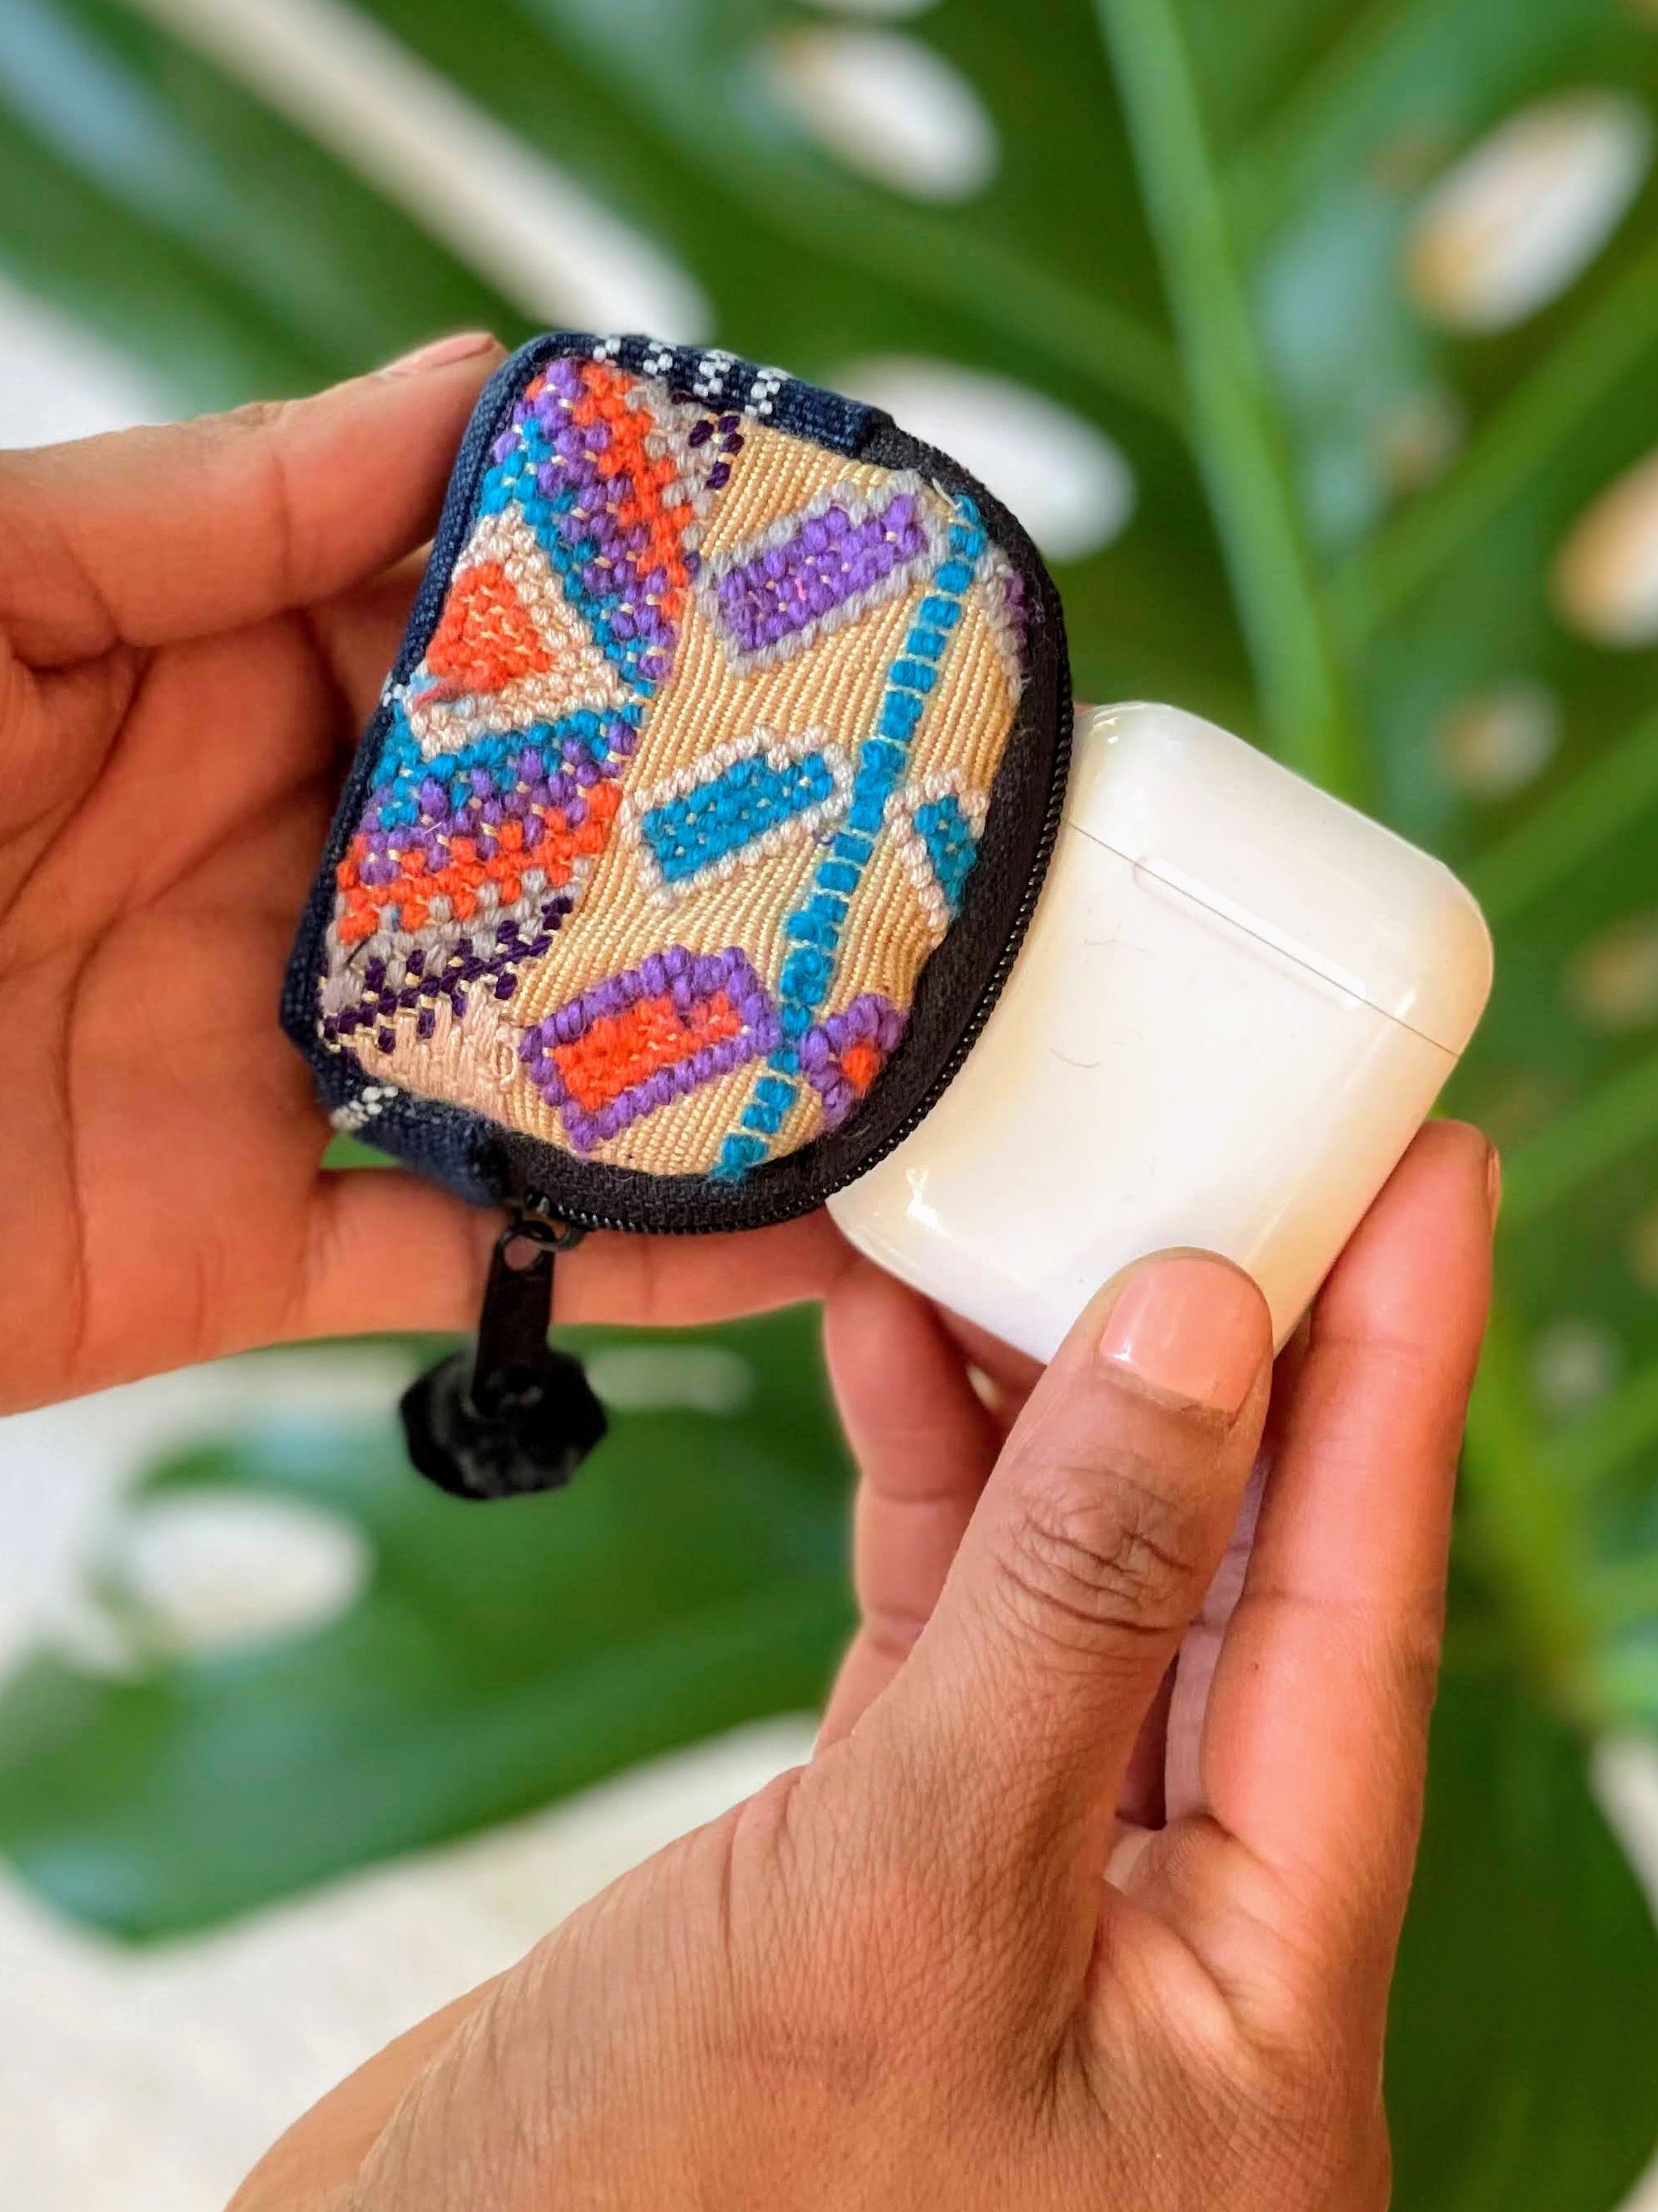 Airpod Case with Huipil Textile